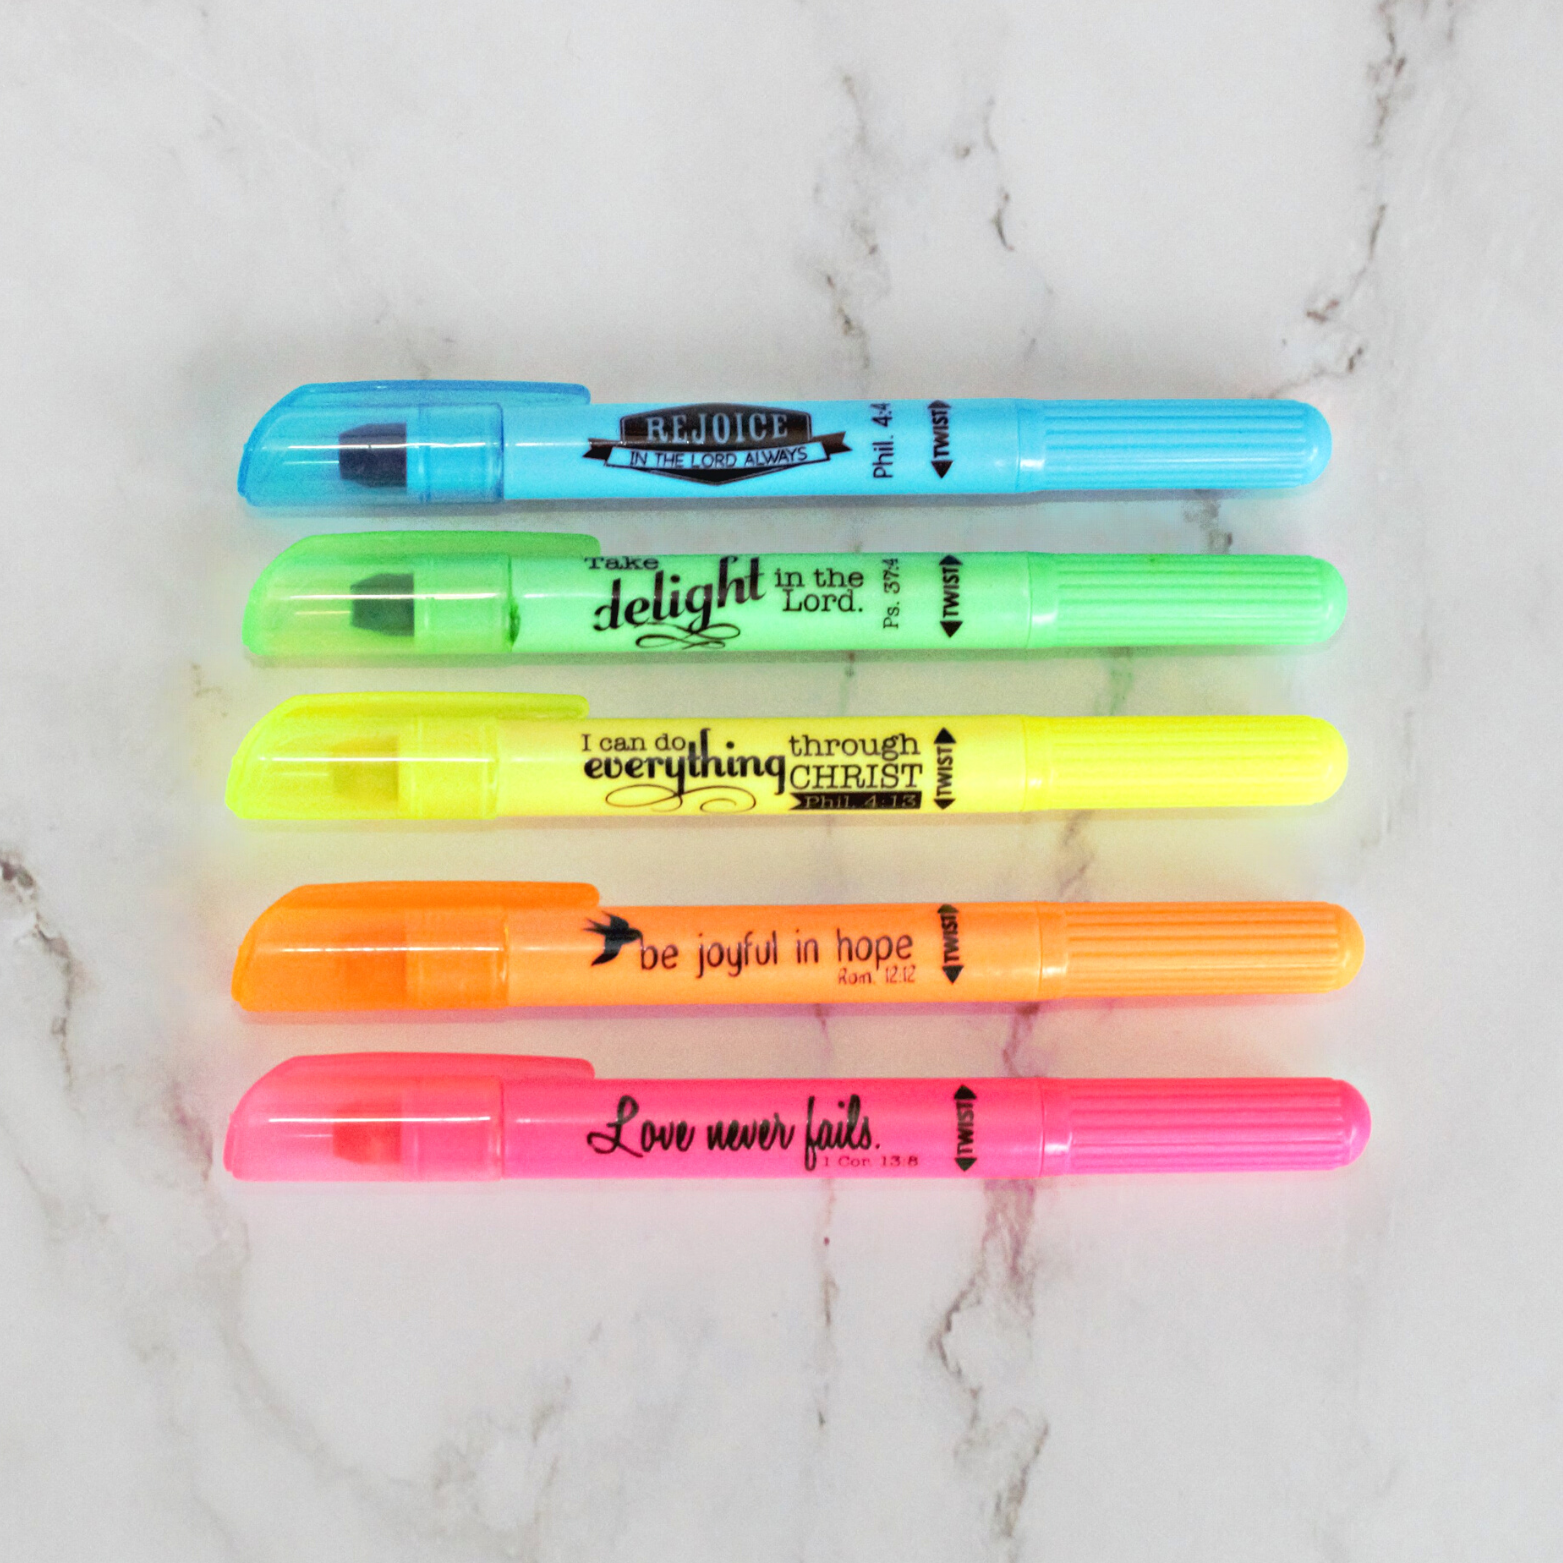 Set of 5 Bible highlighters with bible verses blue, green, yellow, orange, pink